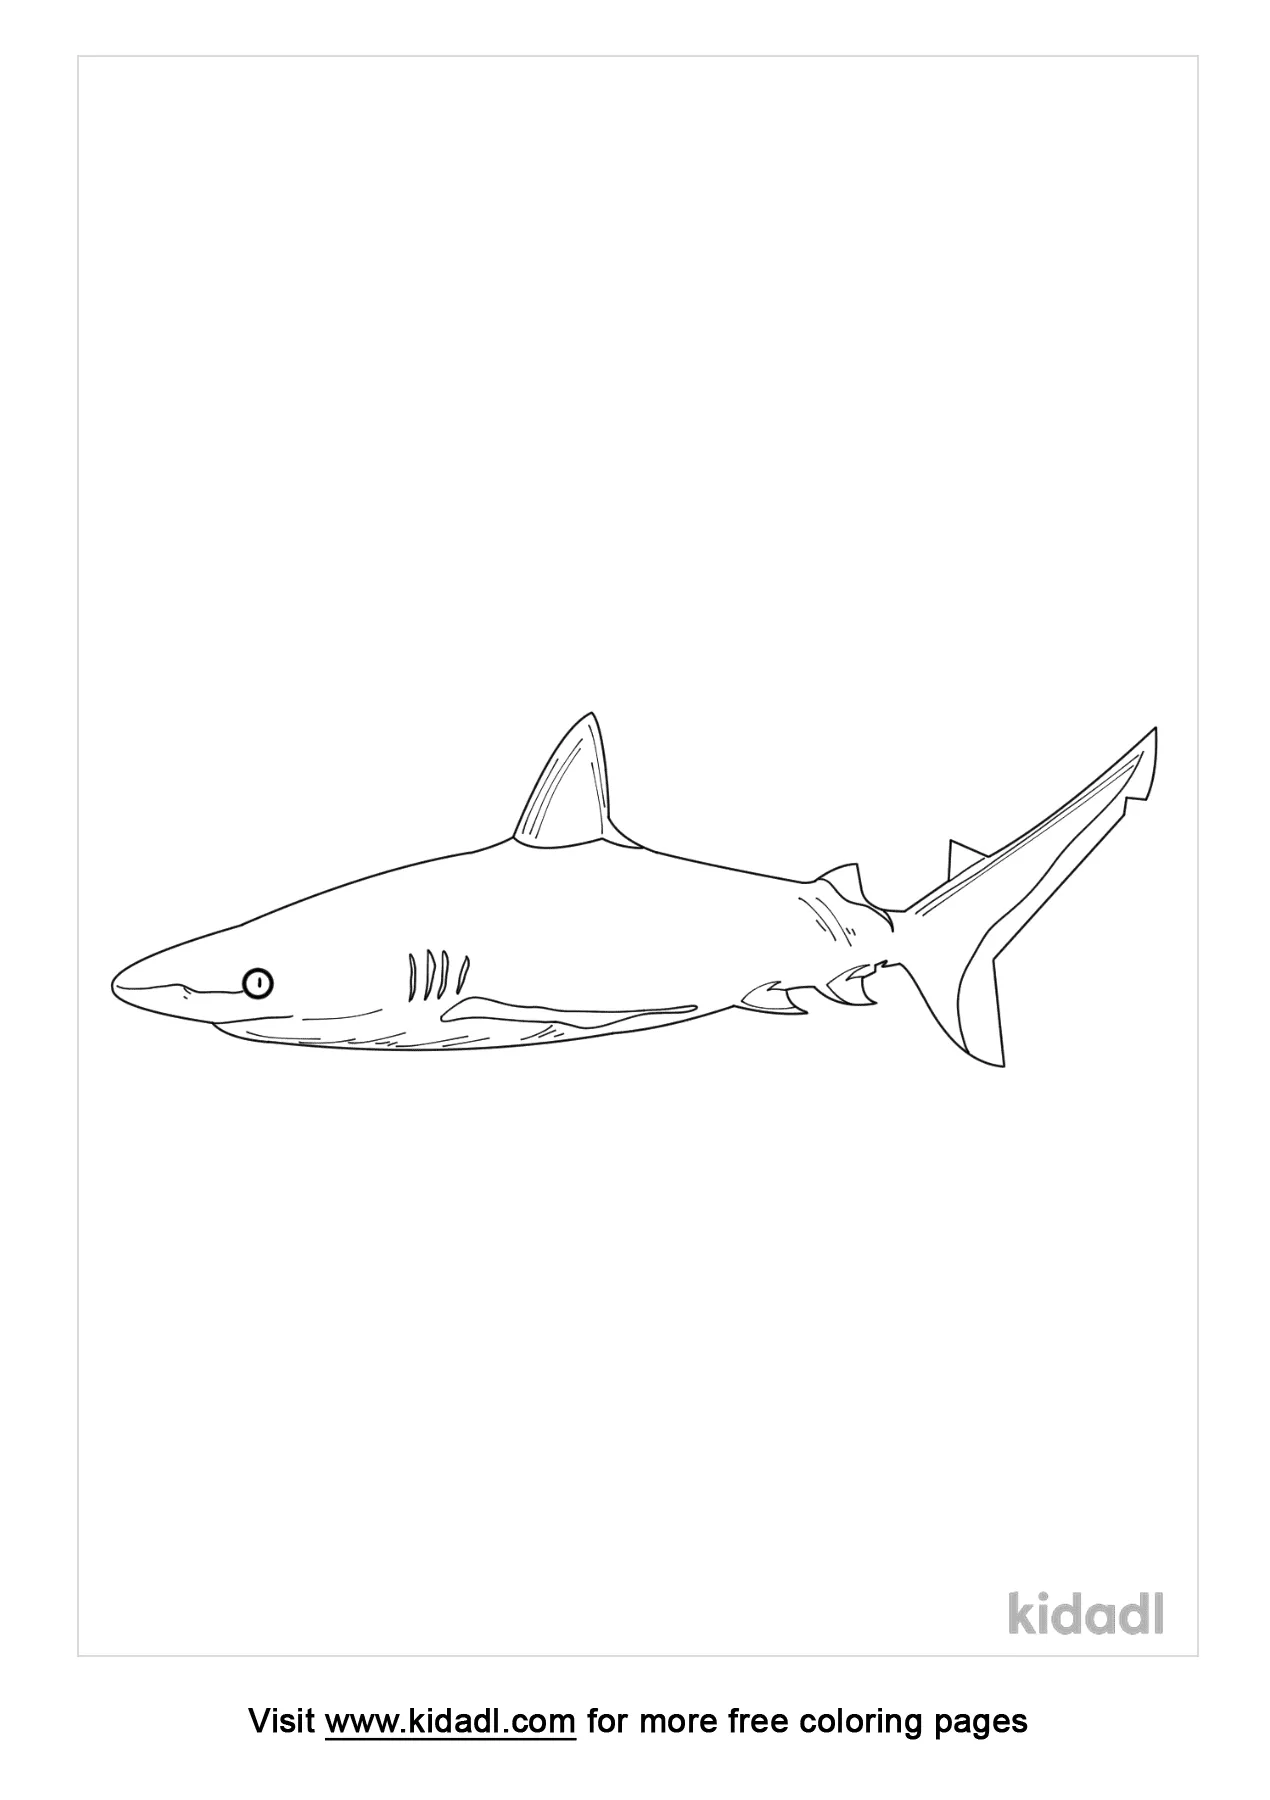 Grey Reef Shark Coloring Page